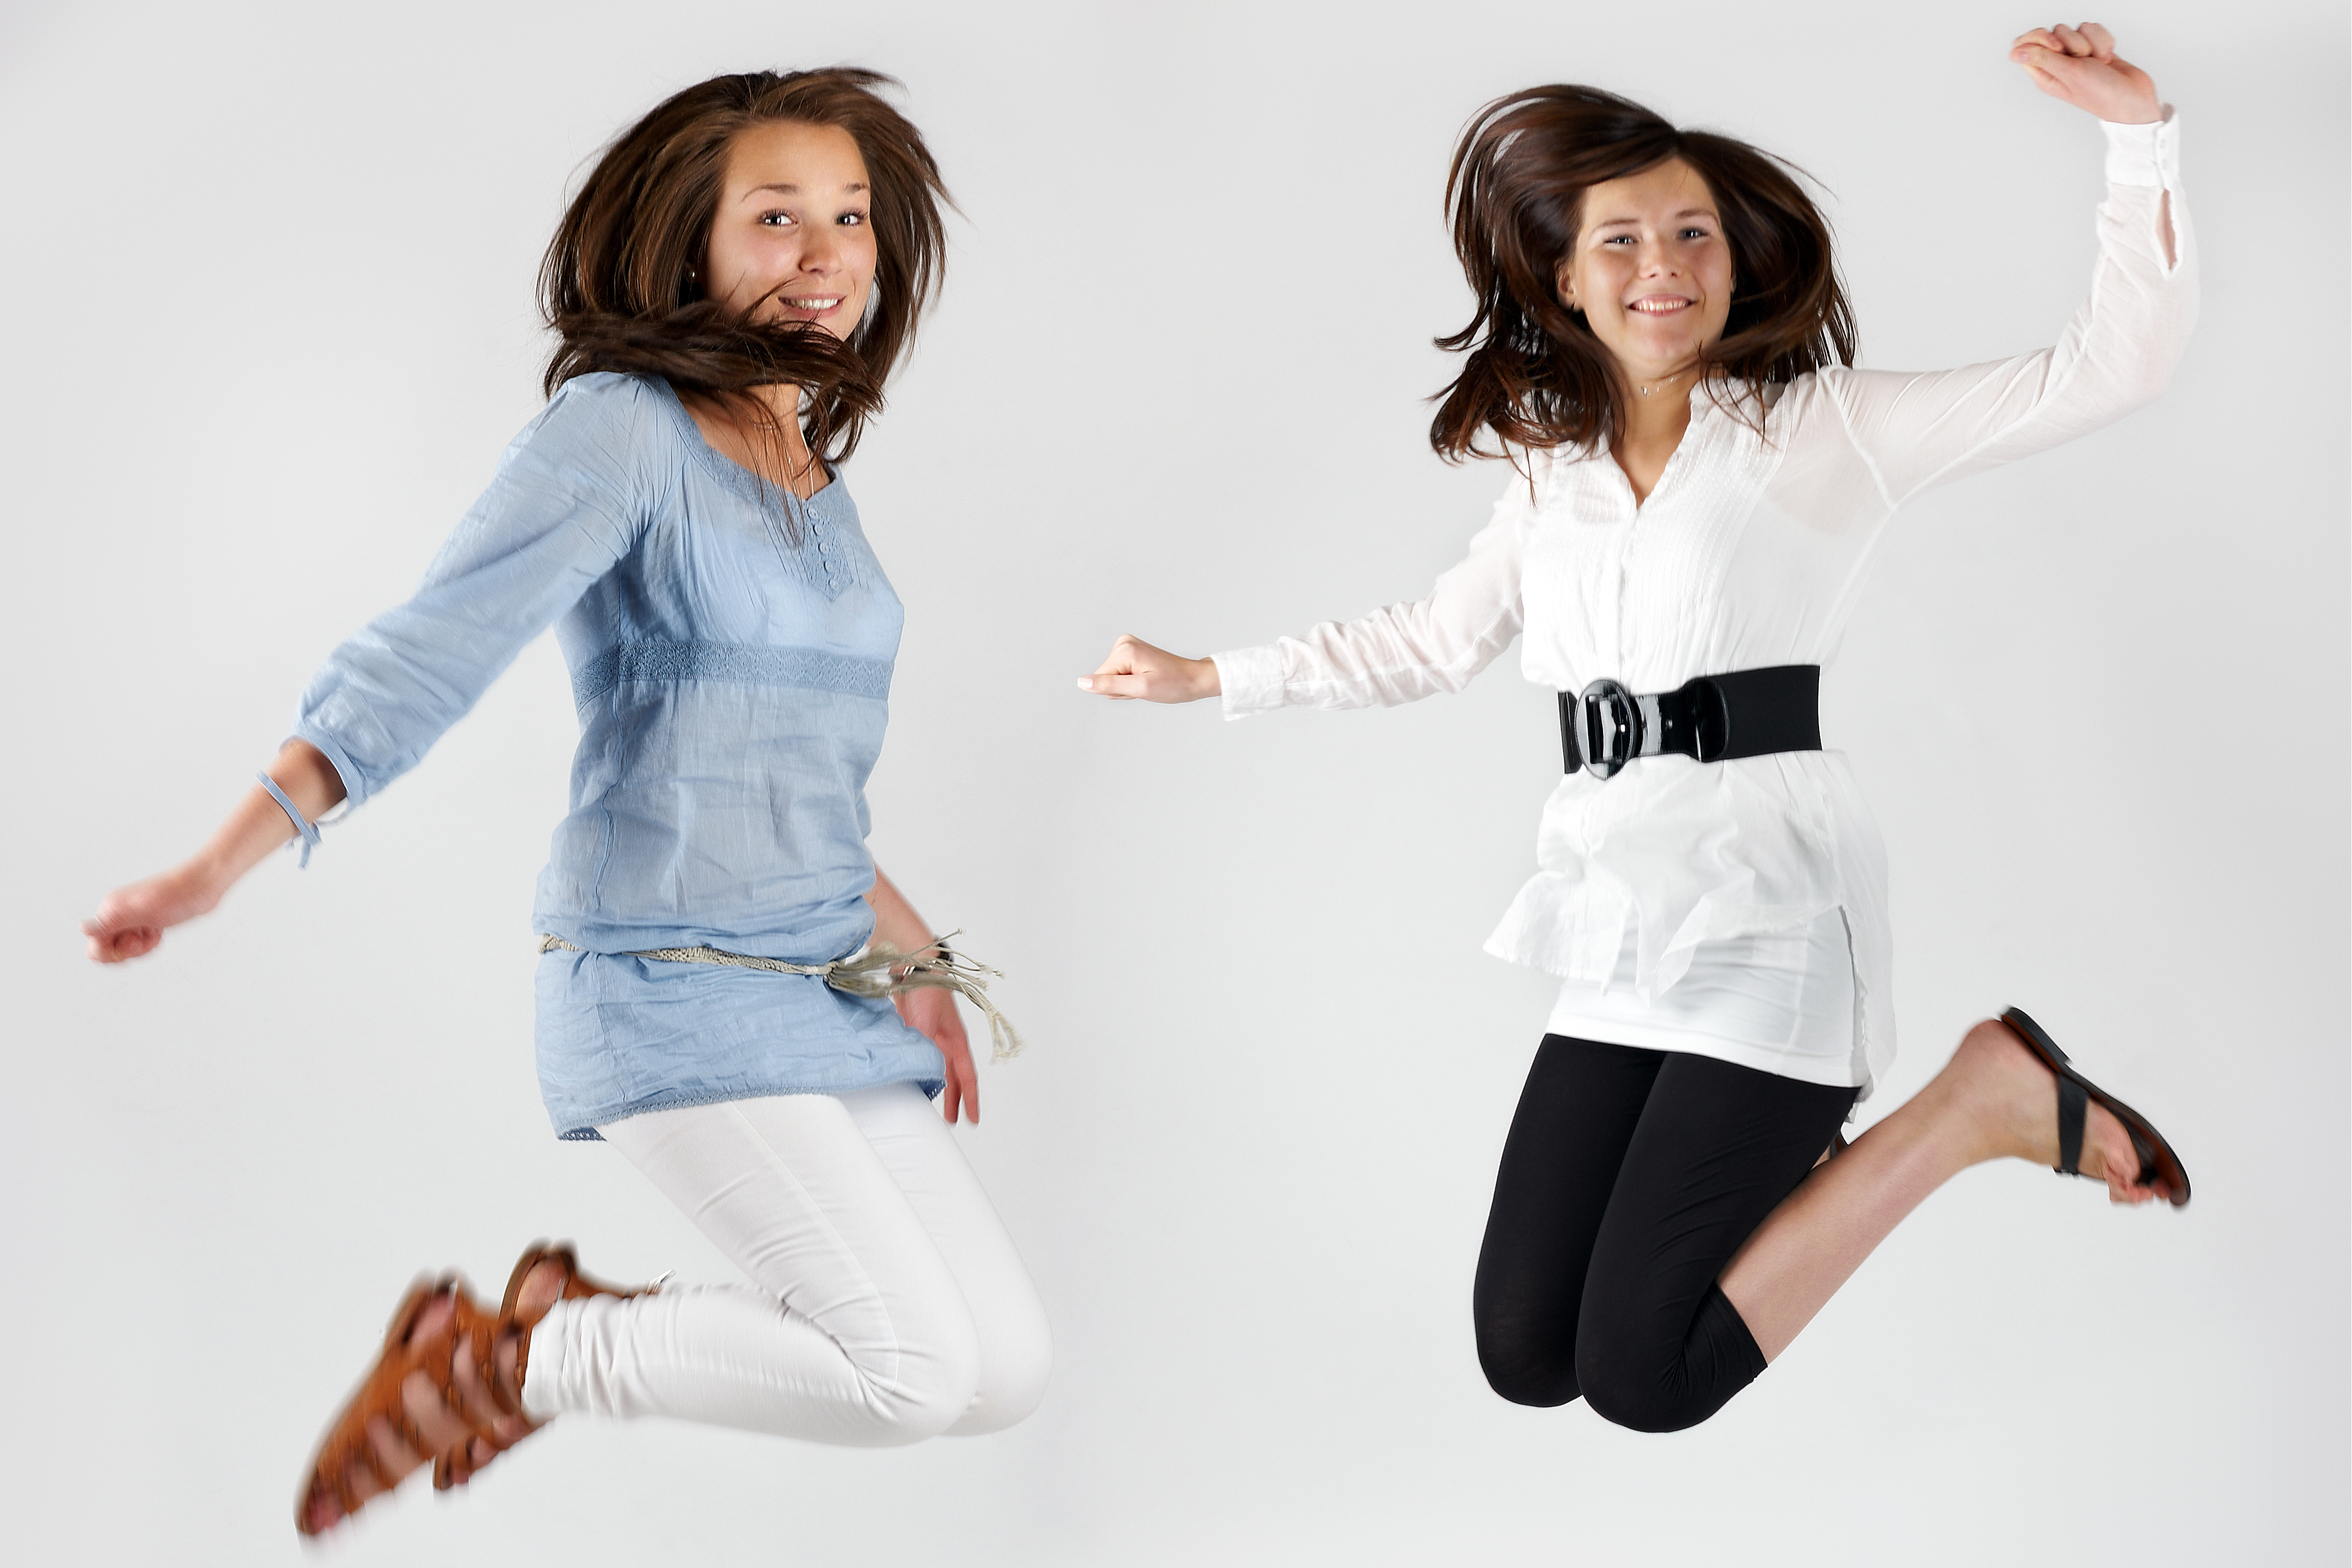 Woman in white Shirt and black pants and Woman in blue shirt and white pants jumping